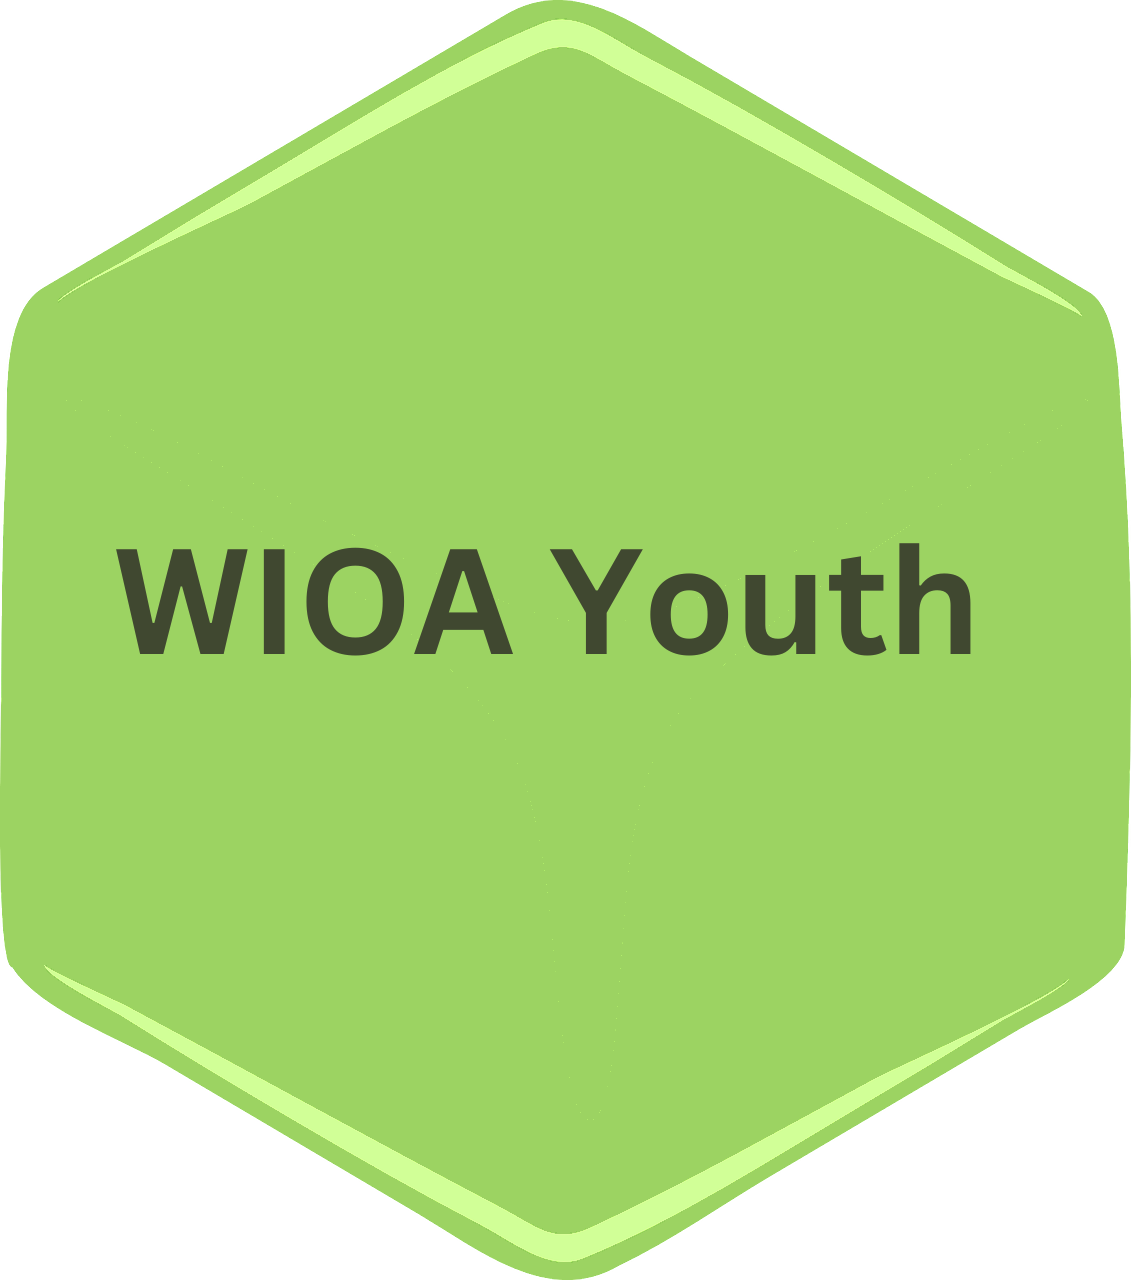 WIOA youth policies